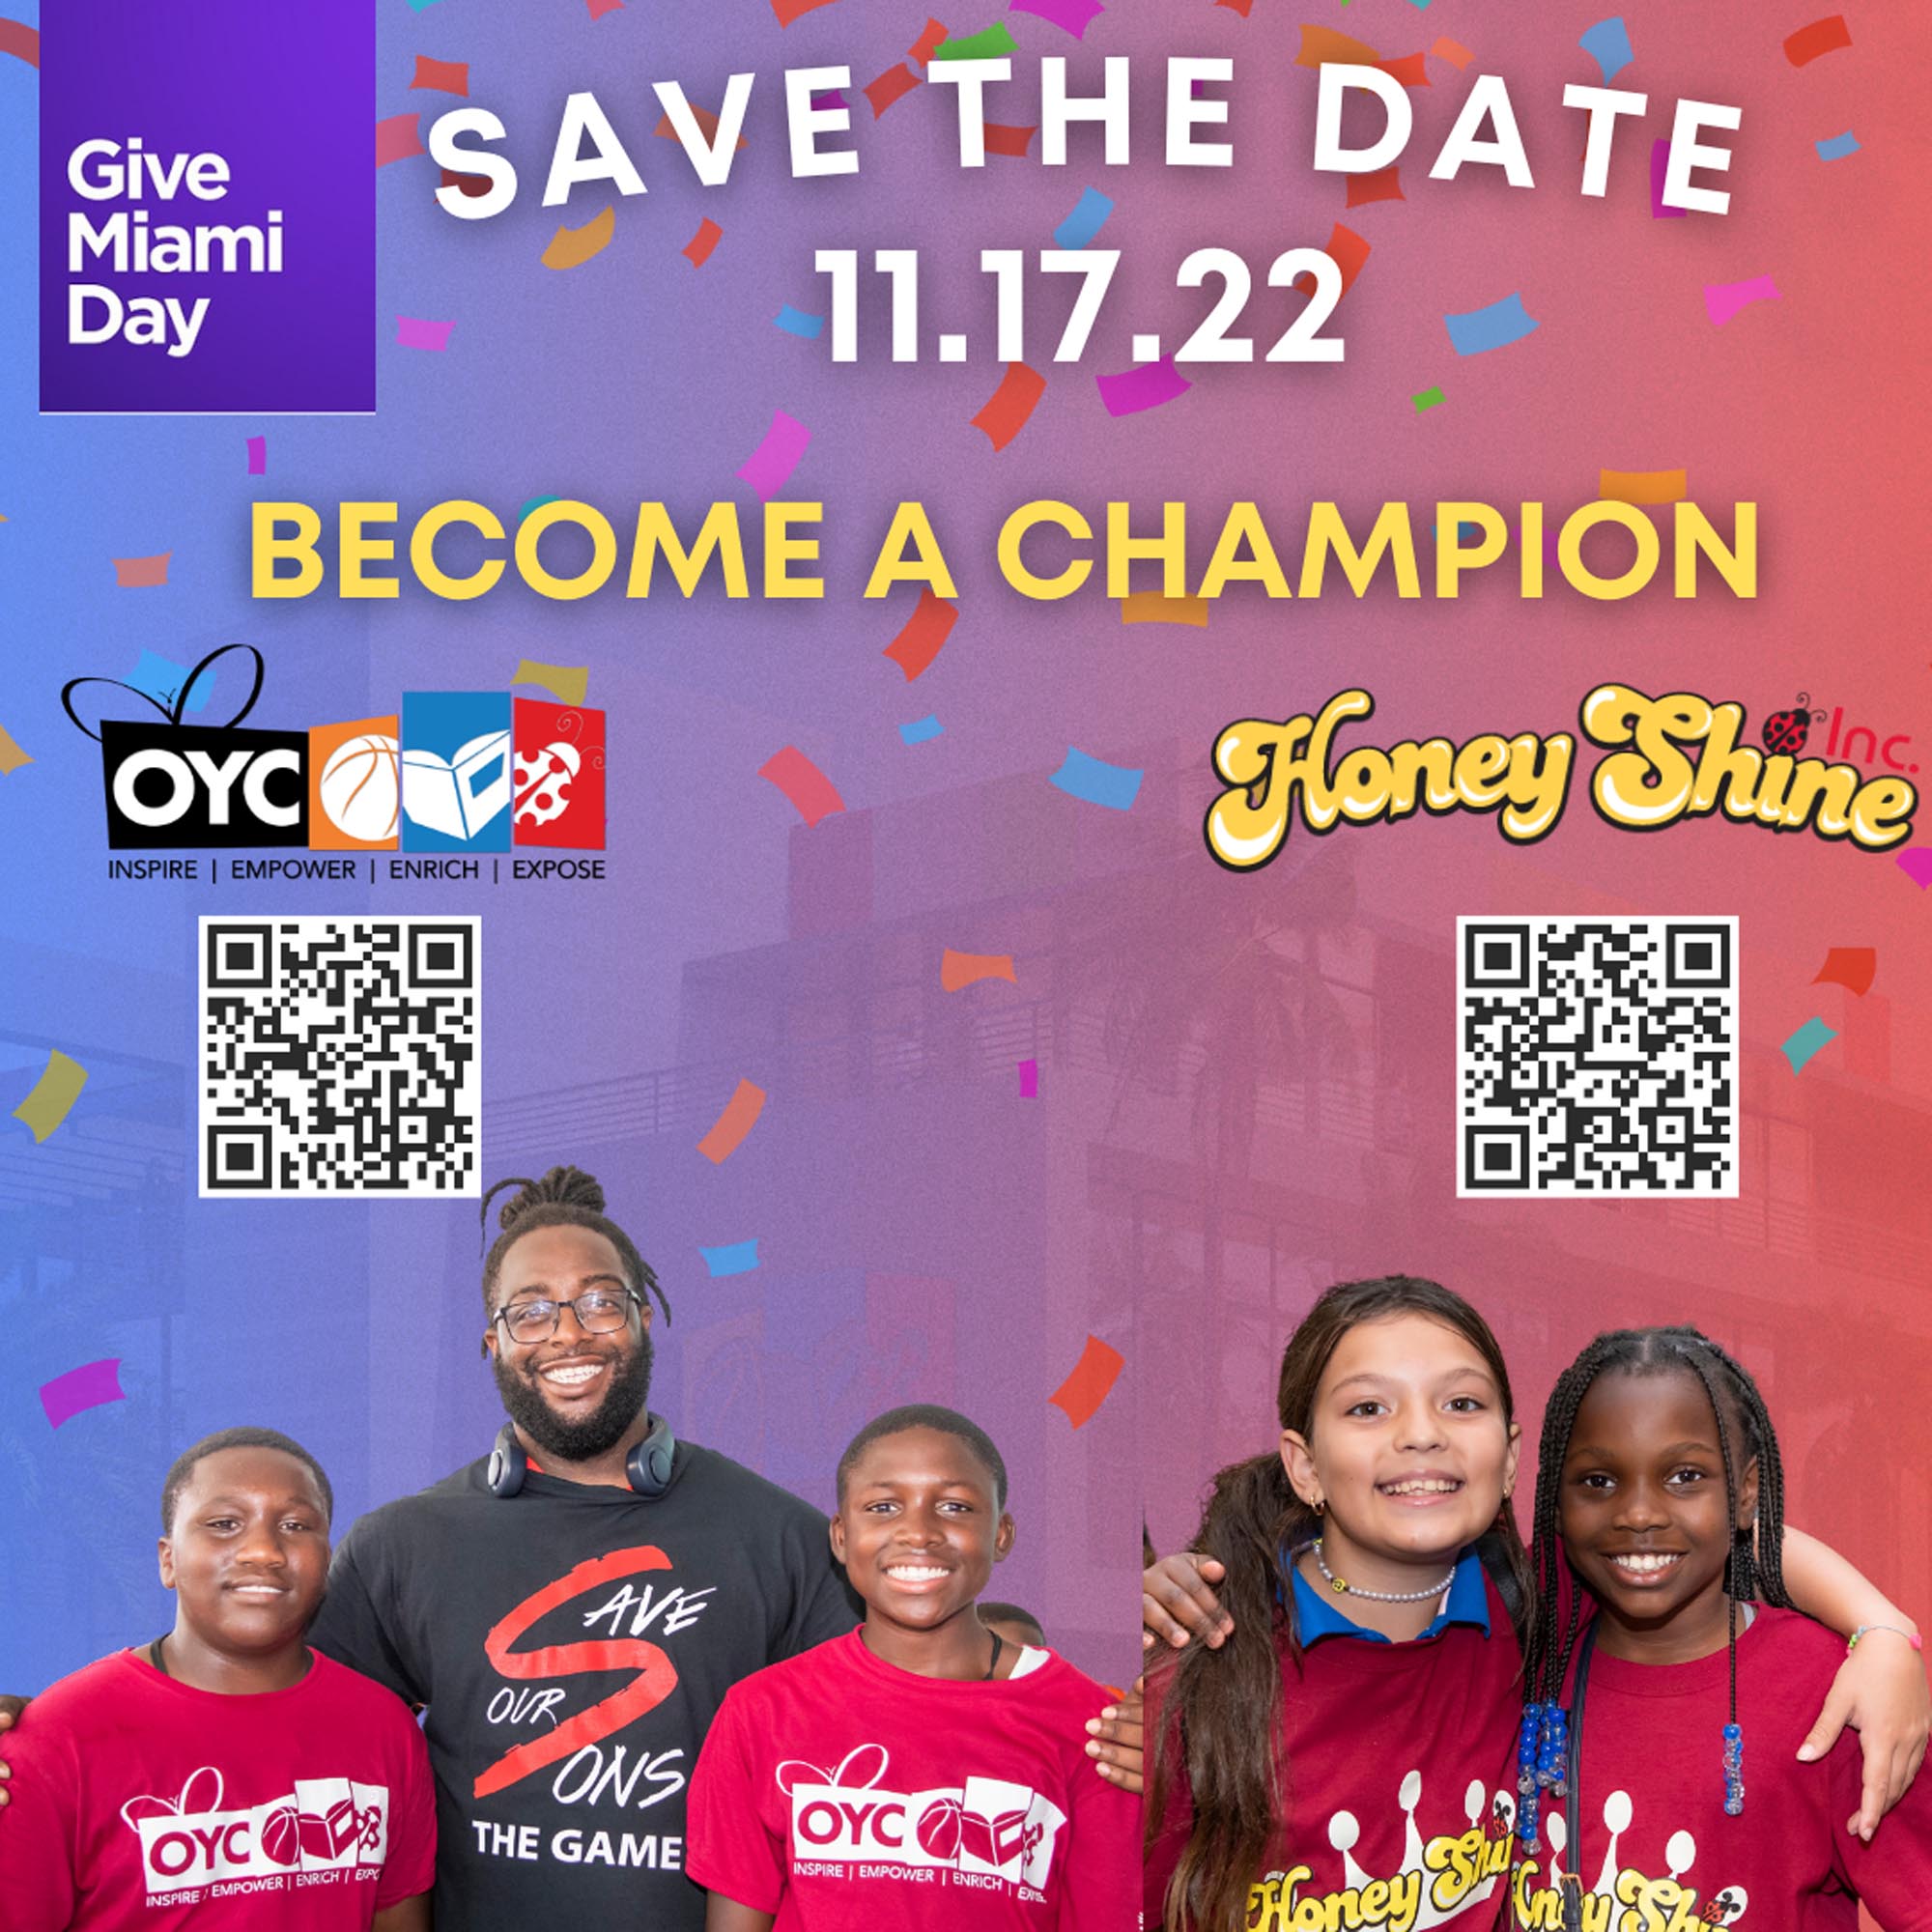 Save the date, 11-17-22. Give Miami Day. Become a Champion for OYC or Honey Shine